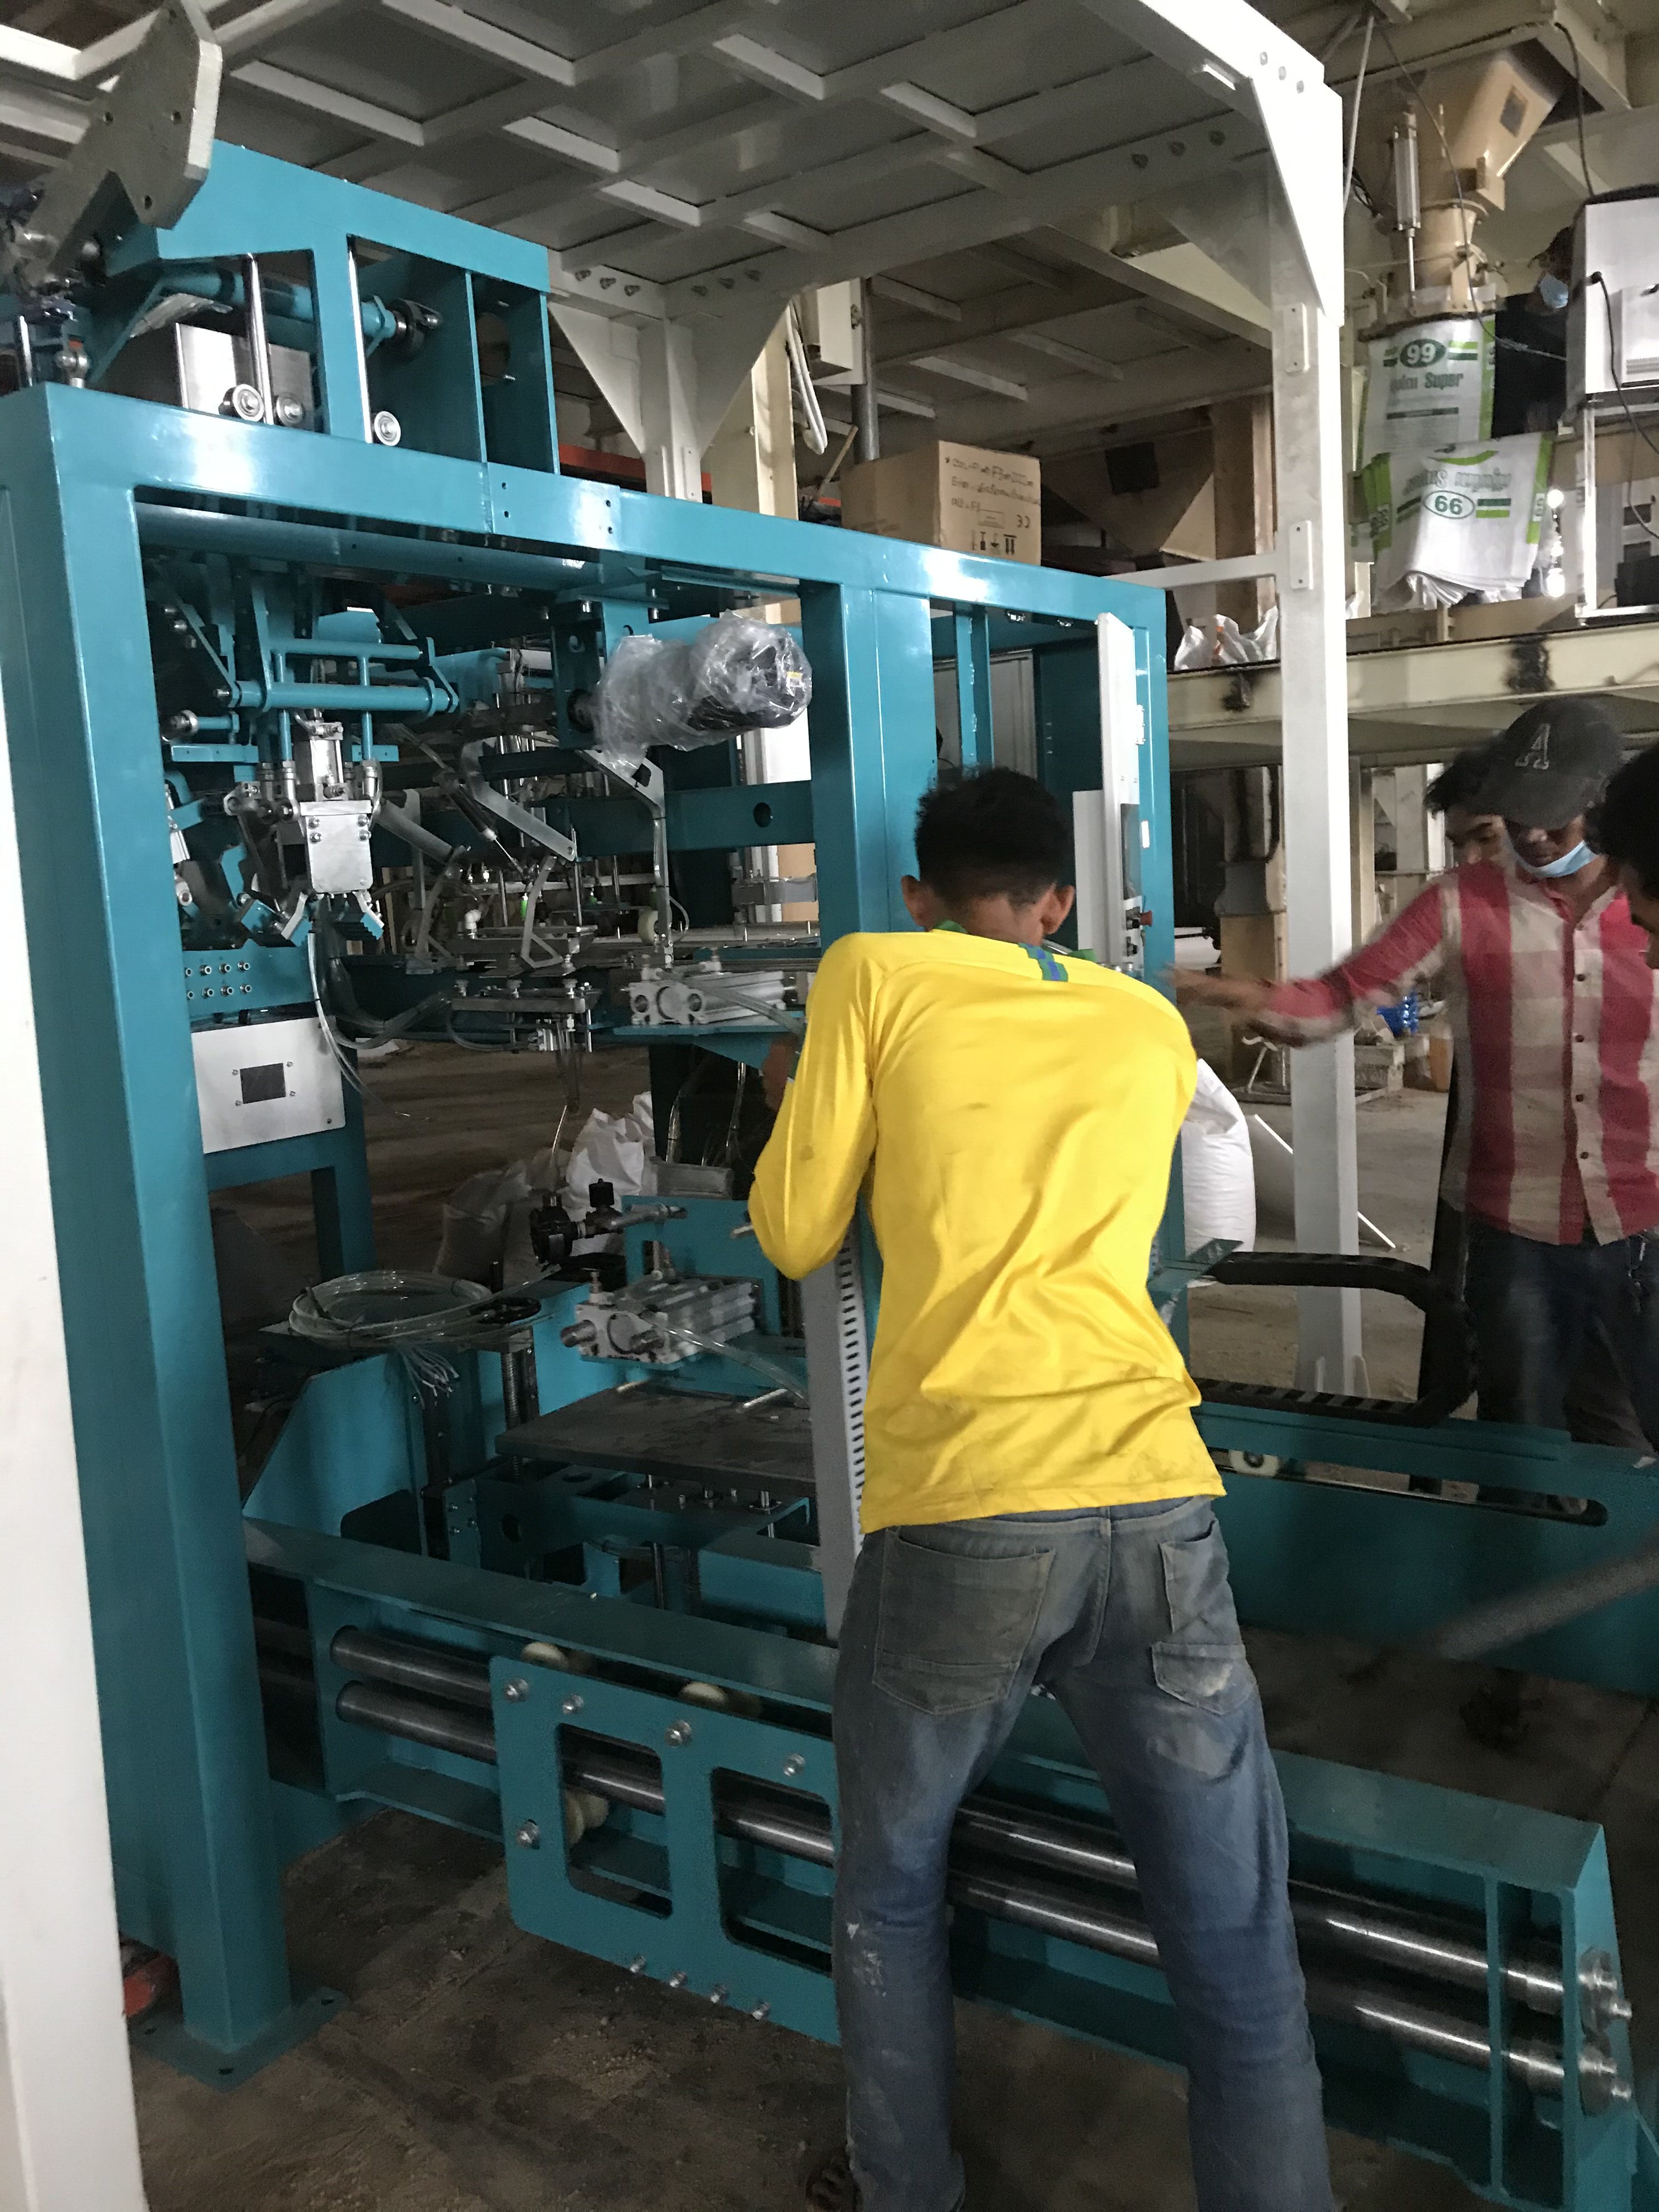 automatic packing machine Filter Sand bagging machine fully Automatic Packing Palletizing Line, Fully Automatic Packing Line, Fully Automatic Bagging Line, Fully Automatic filling and packaging line, 